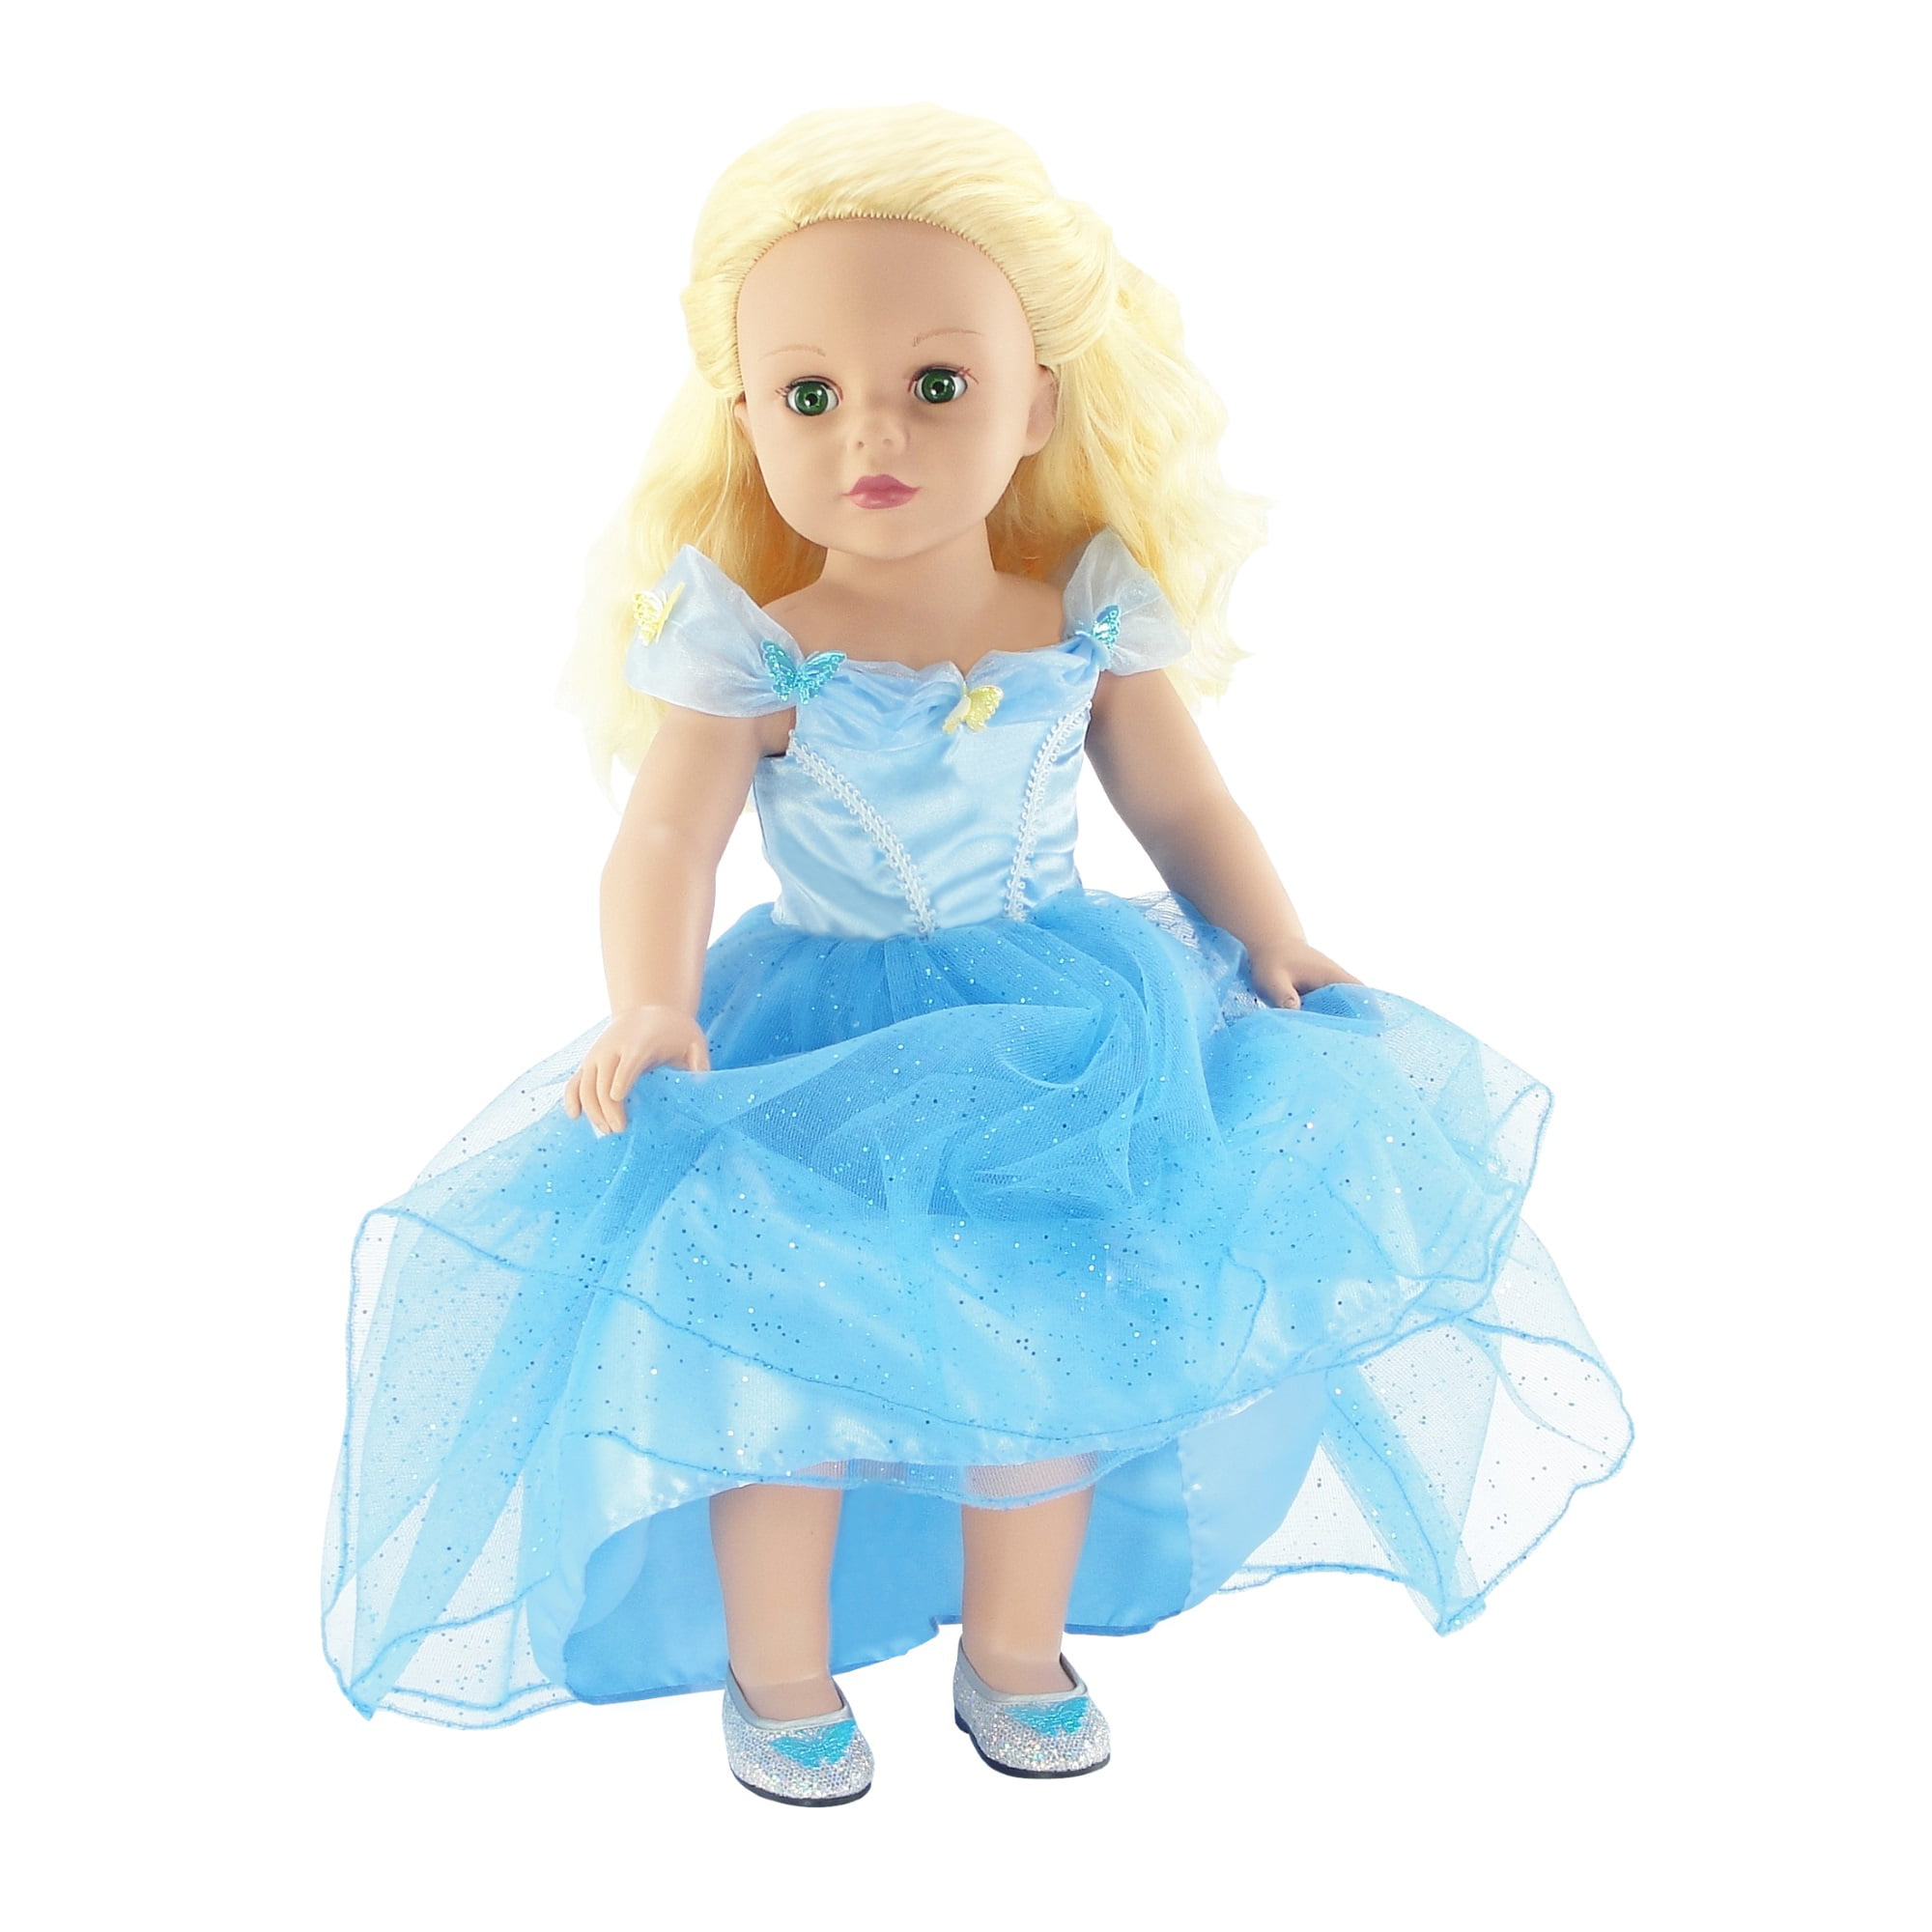 Clear "Glass" Cinderella Princess Slippers fit 18" American Girl Size Doll 